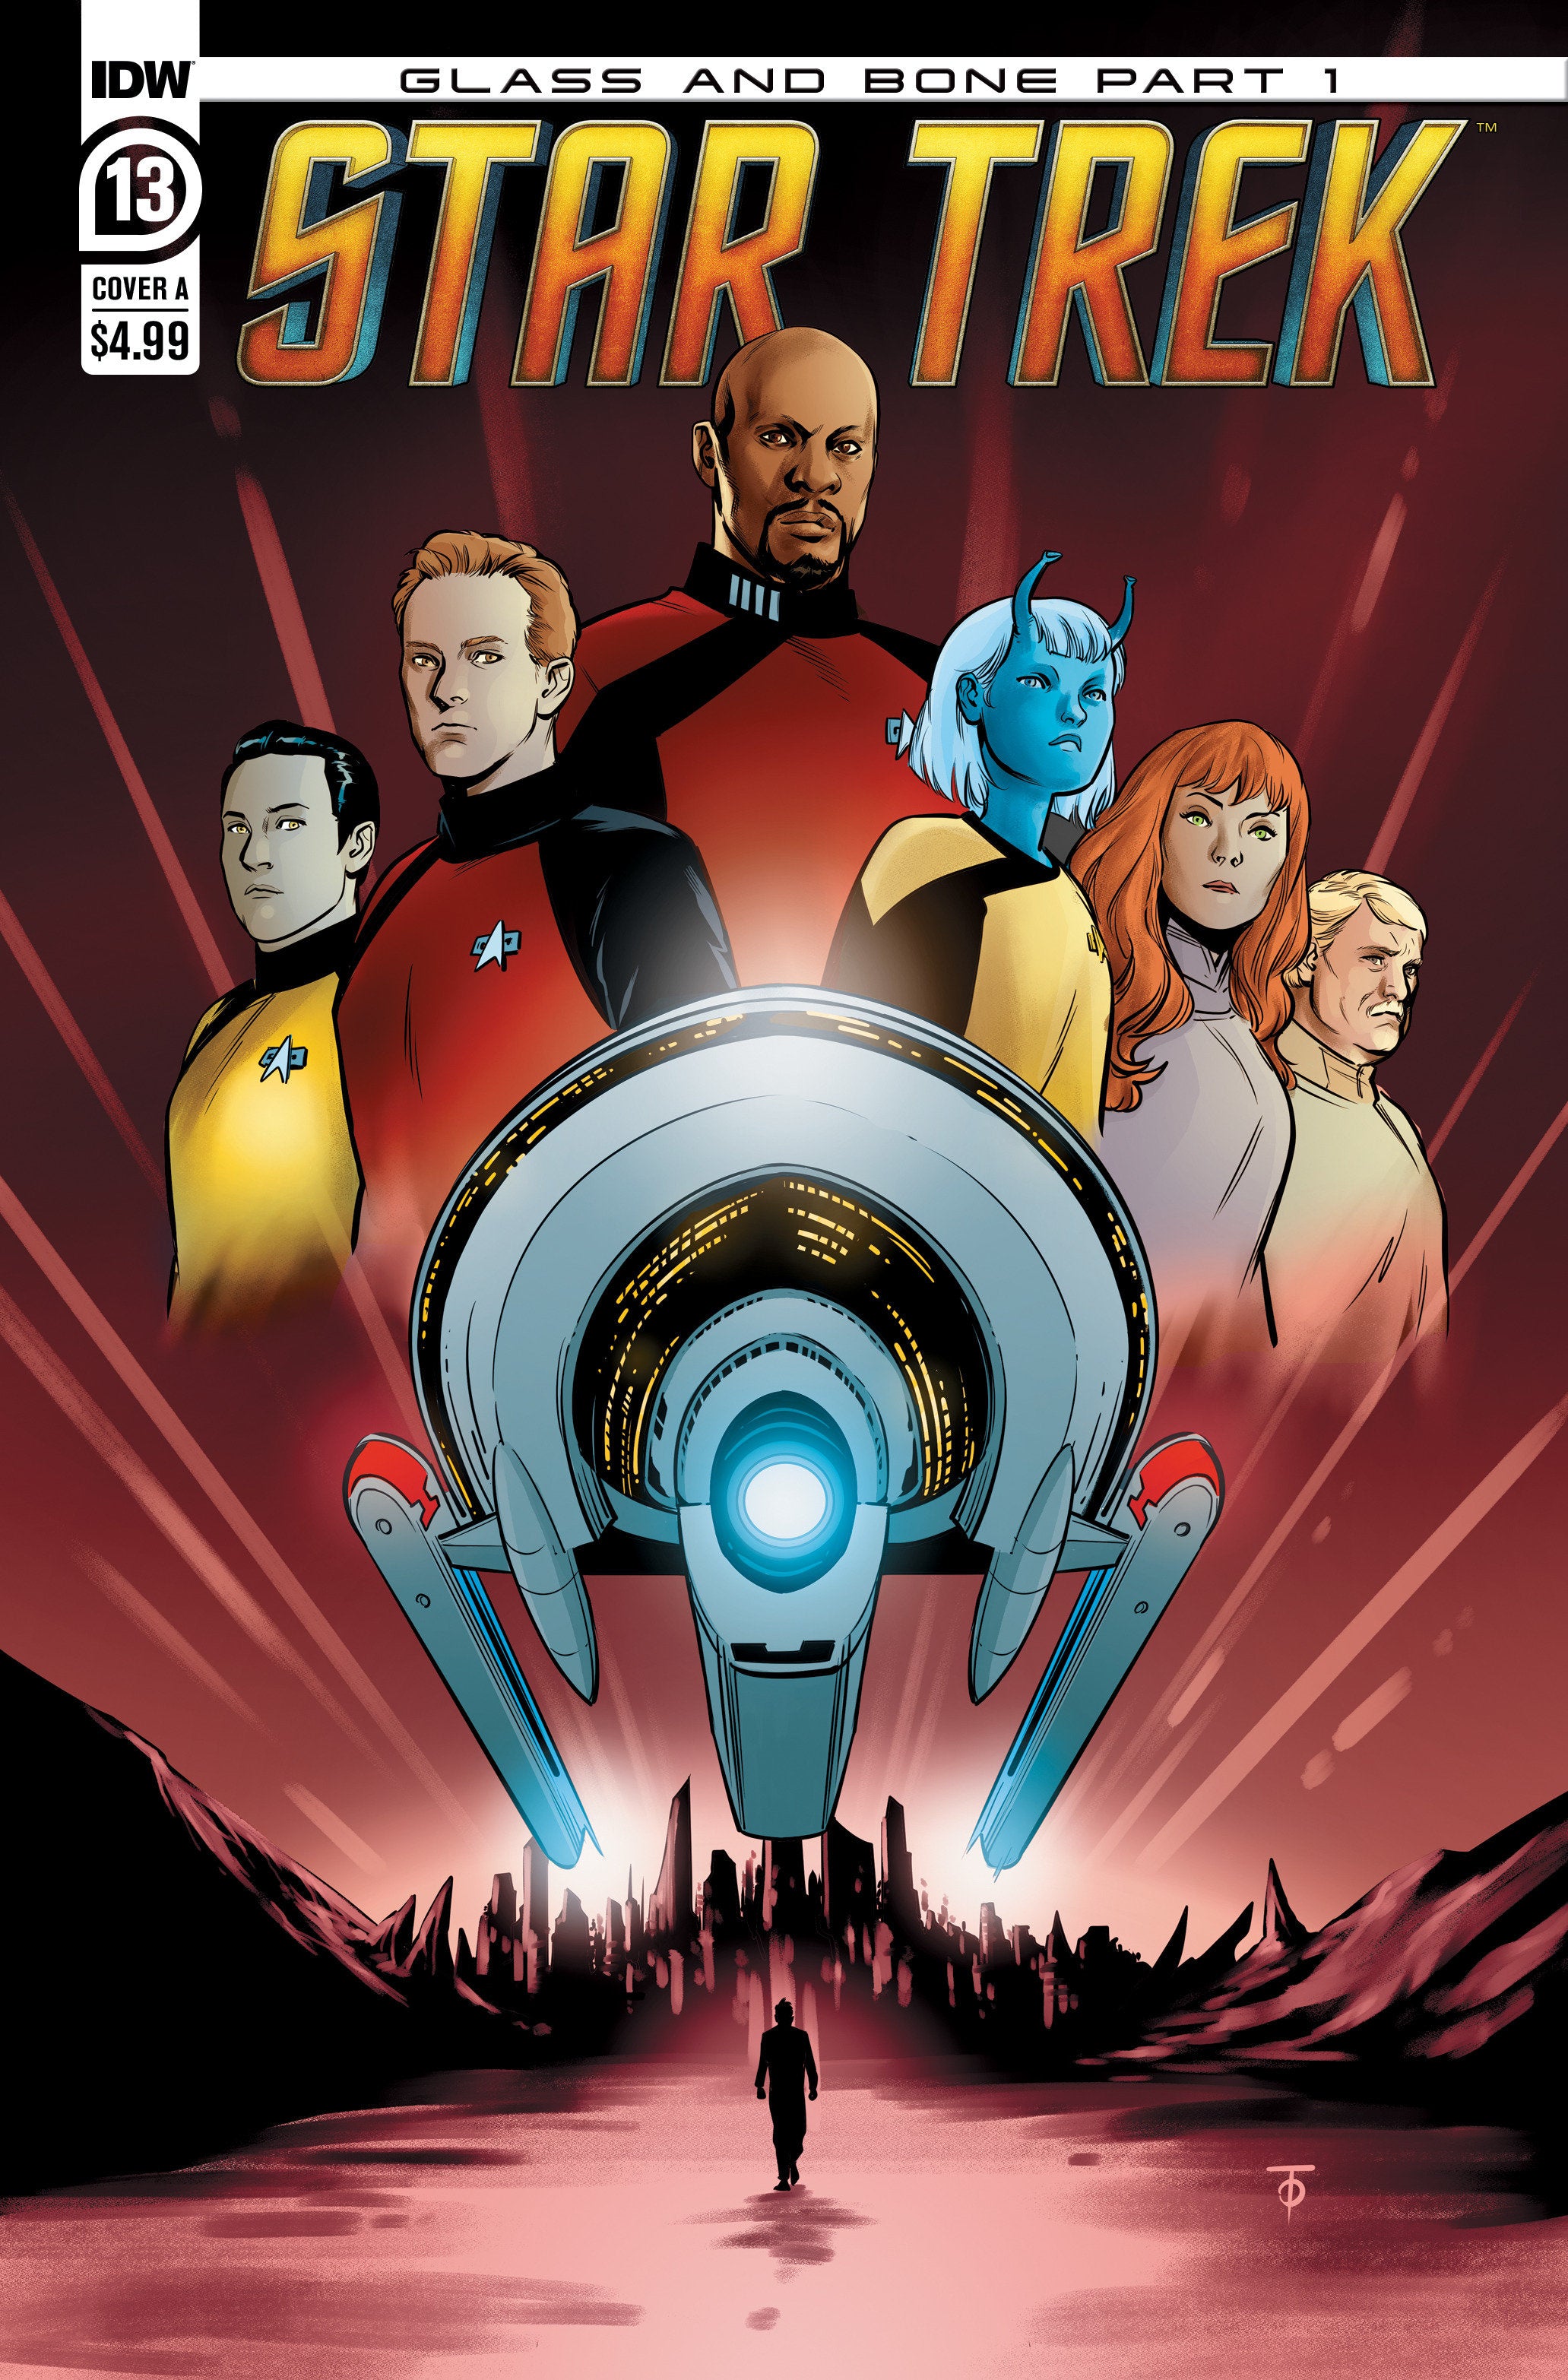 Star Trek #13 Cover A (To) | Game Master's Emporium (The New GME)